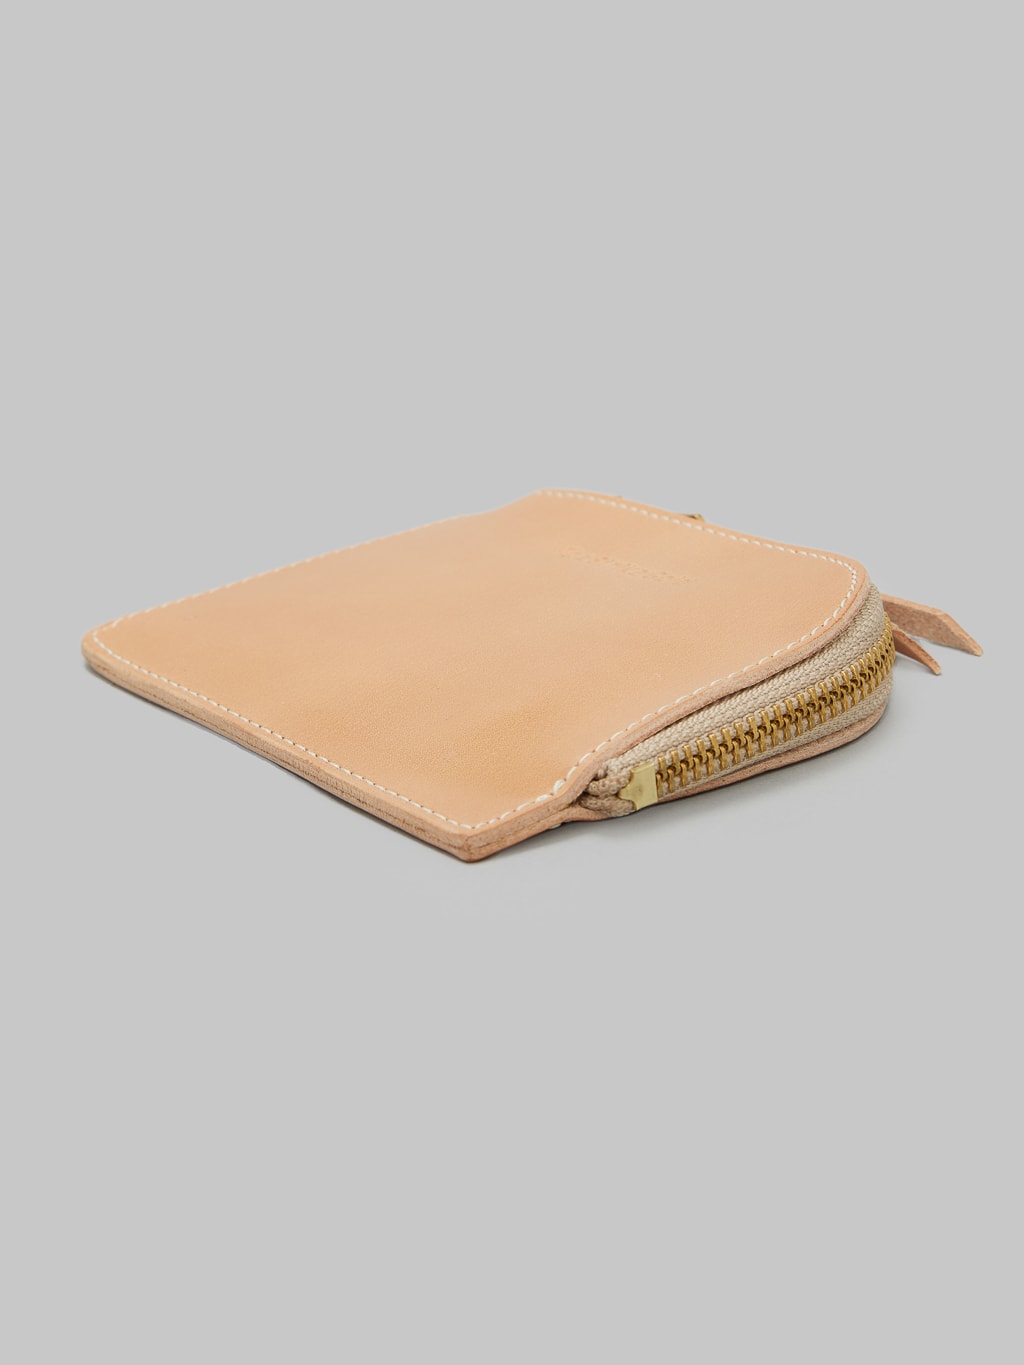 The Strike Gold Leather Zip Wallet Natural side detail